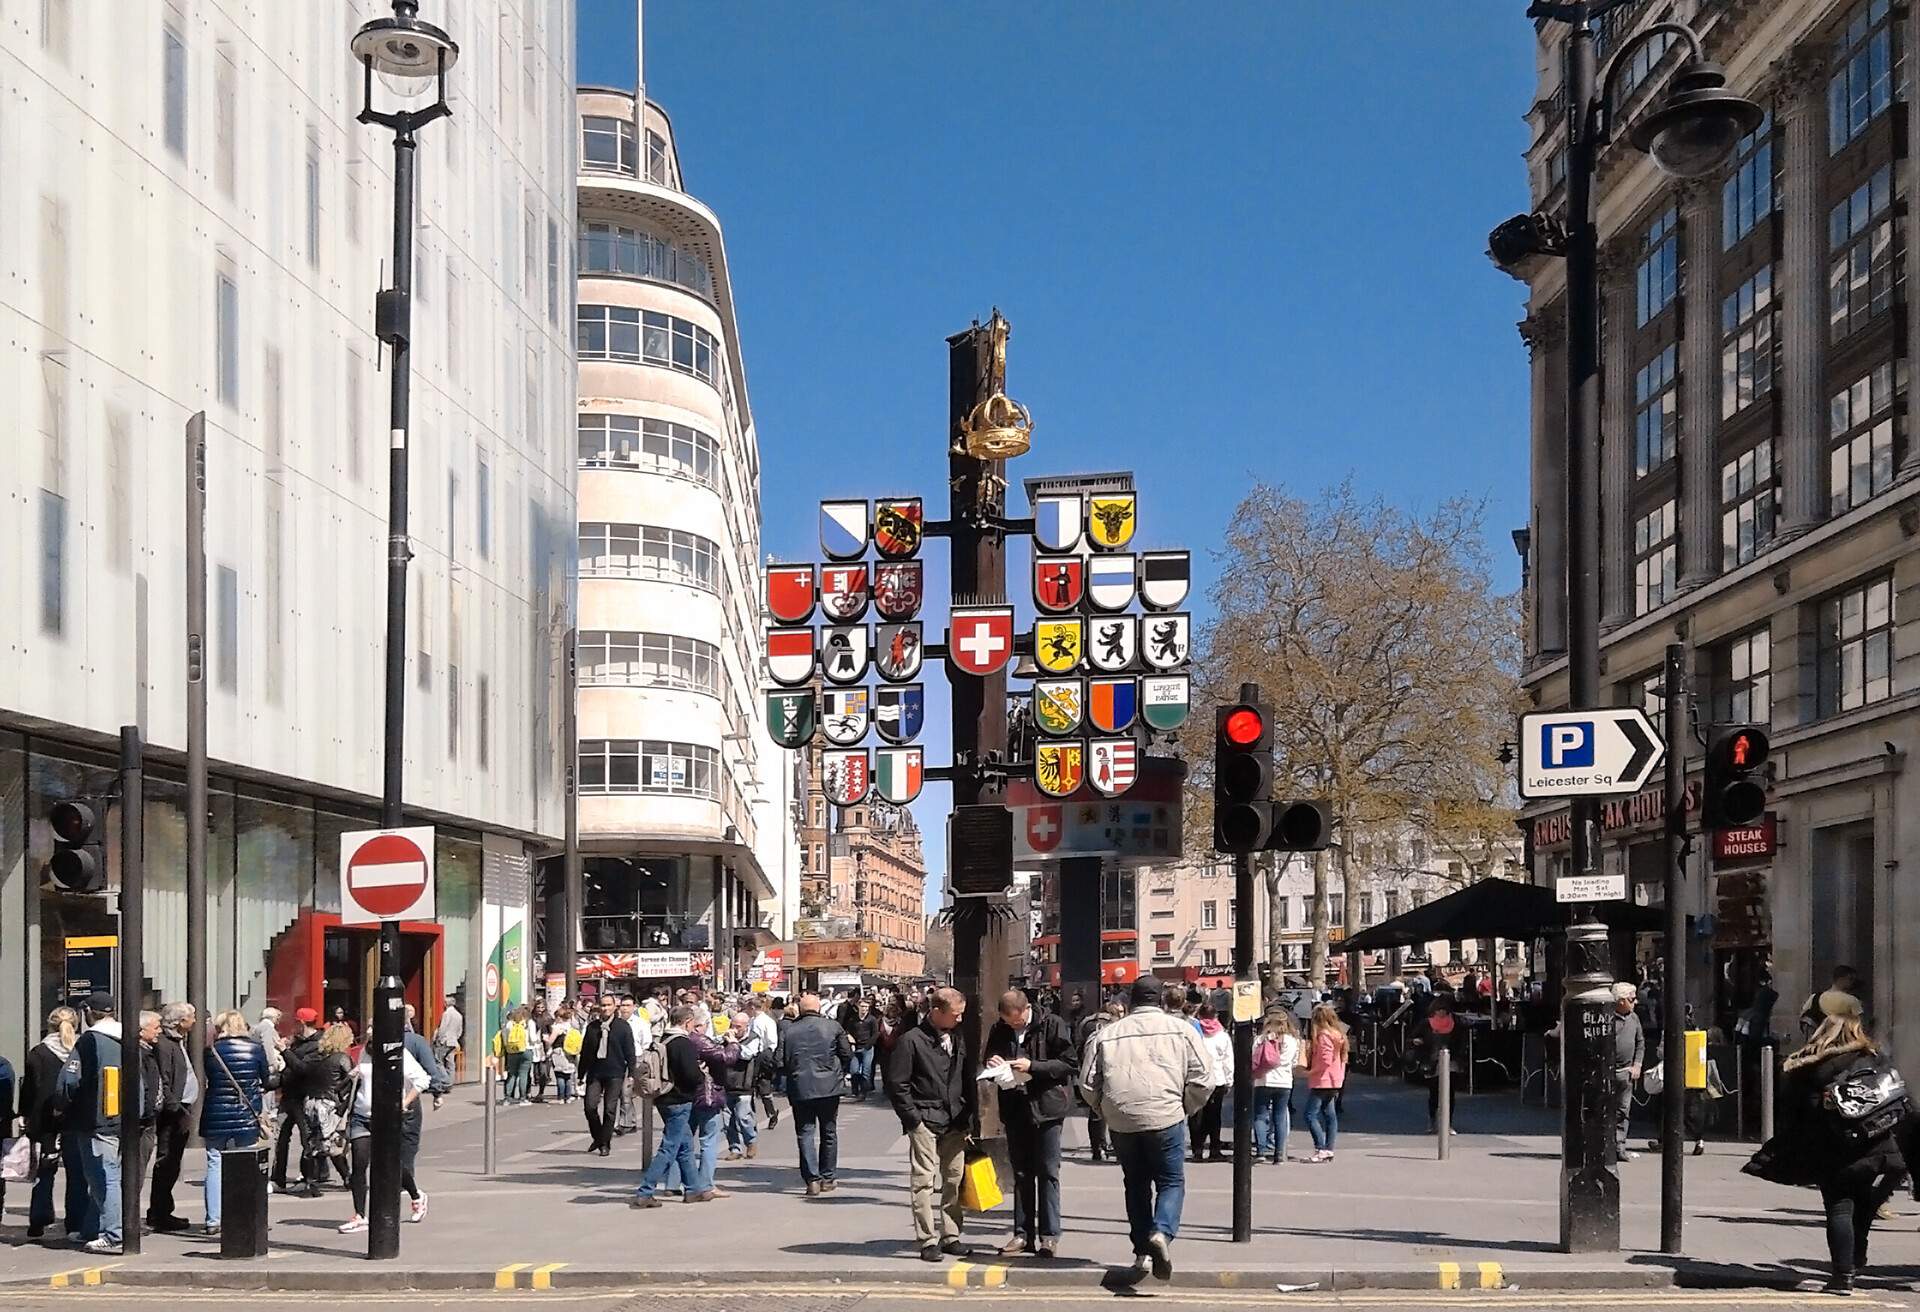 A view of Swiss Ct and Leicester square in London. this is a well-known and busy area in the city that is visited for many tourists and Londoners daily. 